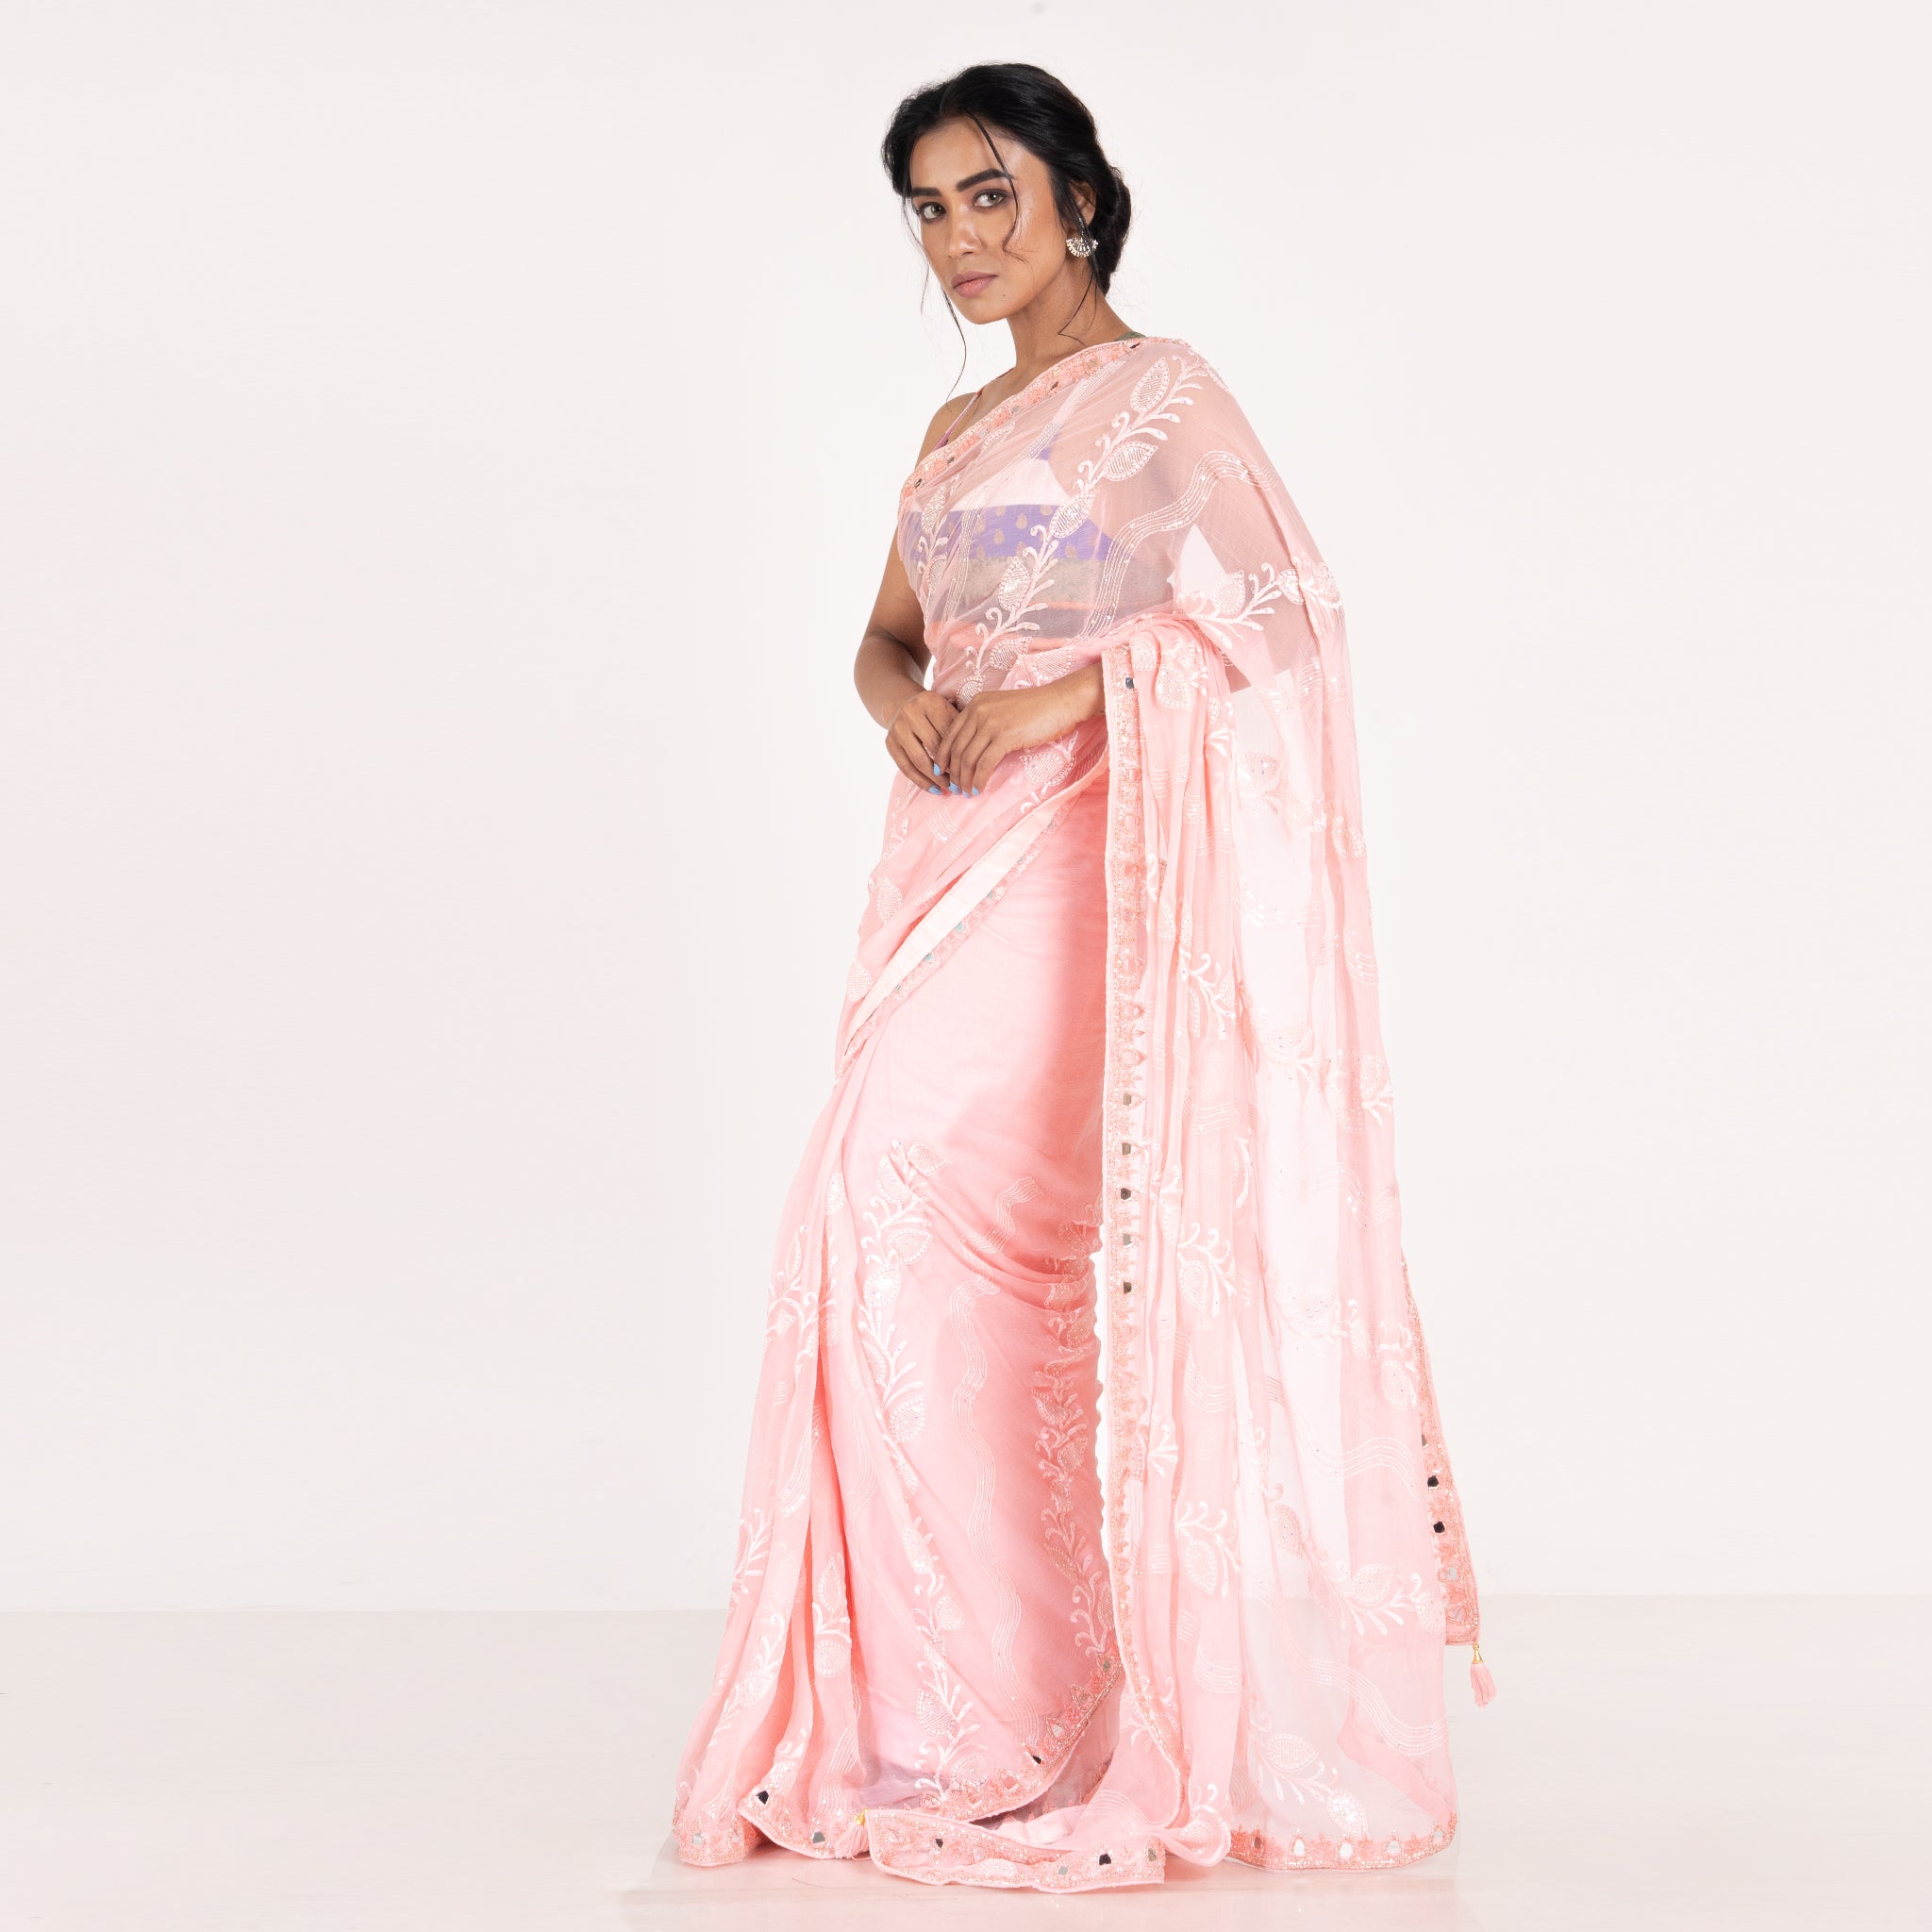 Women's Dusky Pink Pure Chiffon Fully Embroidered Saree With Crystalisation - Boveee